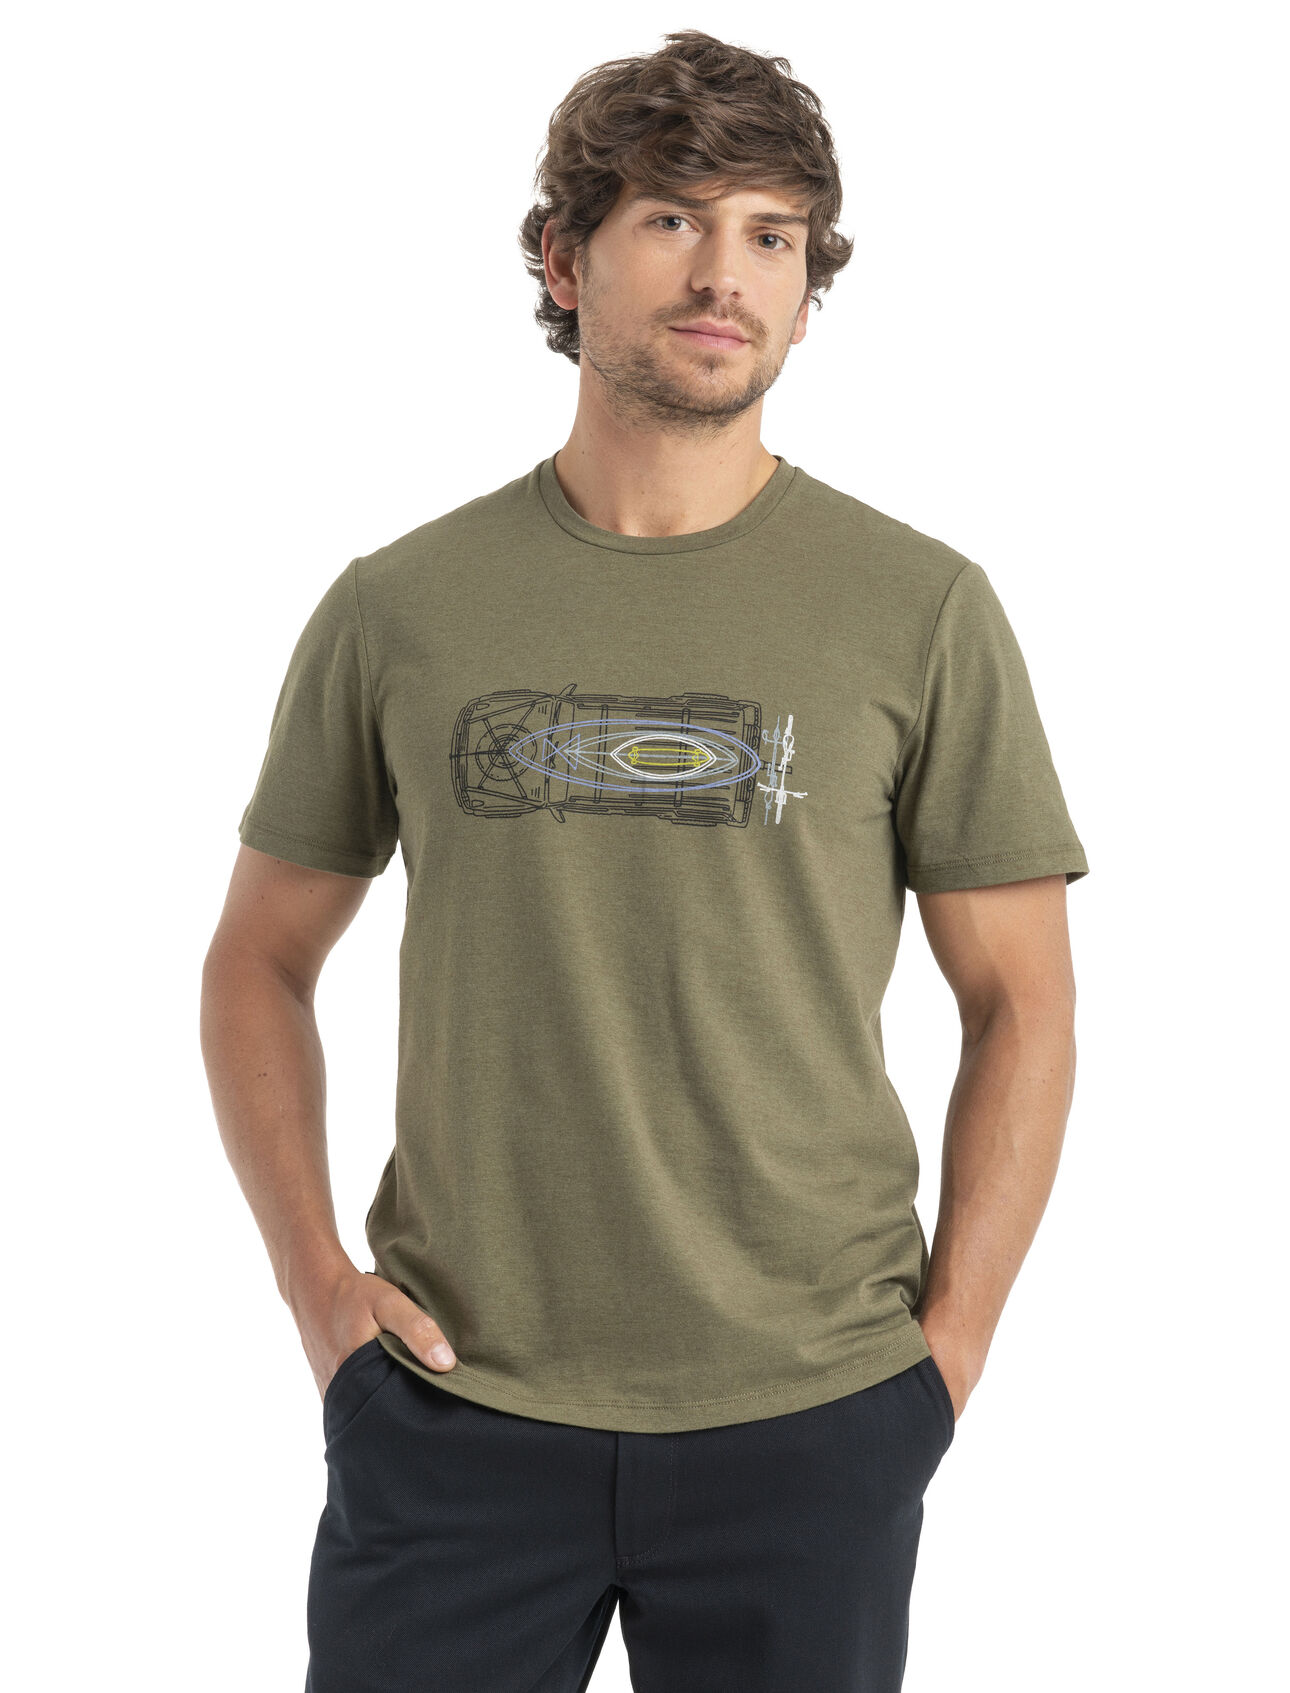 Mens Merino Central Classic Short Sleeve T-Shirt Wireframe Wonder Central to your wardrobe and as classic as they come, the Central Classic Short Sleeve Tee Wireframe Wonder is a go-to tee featuring a soft jersey blend of merino wool and organic cotton.